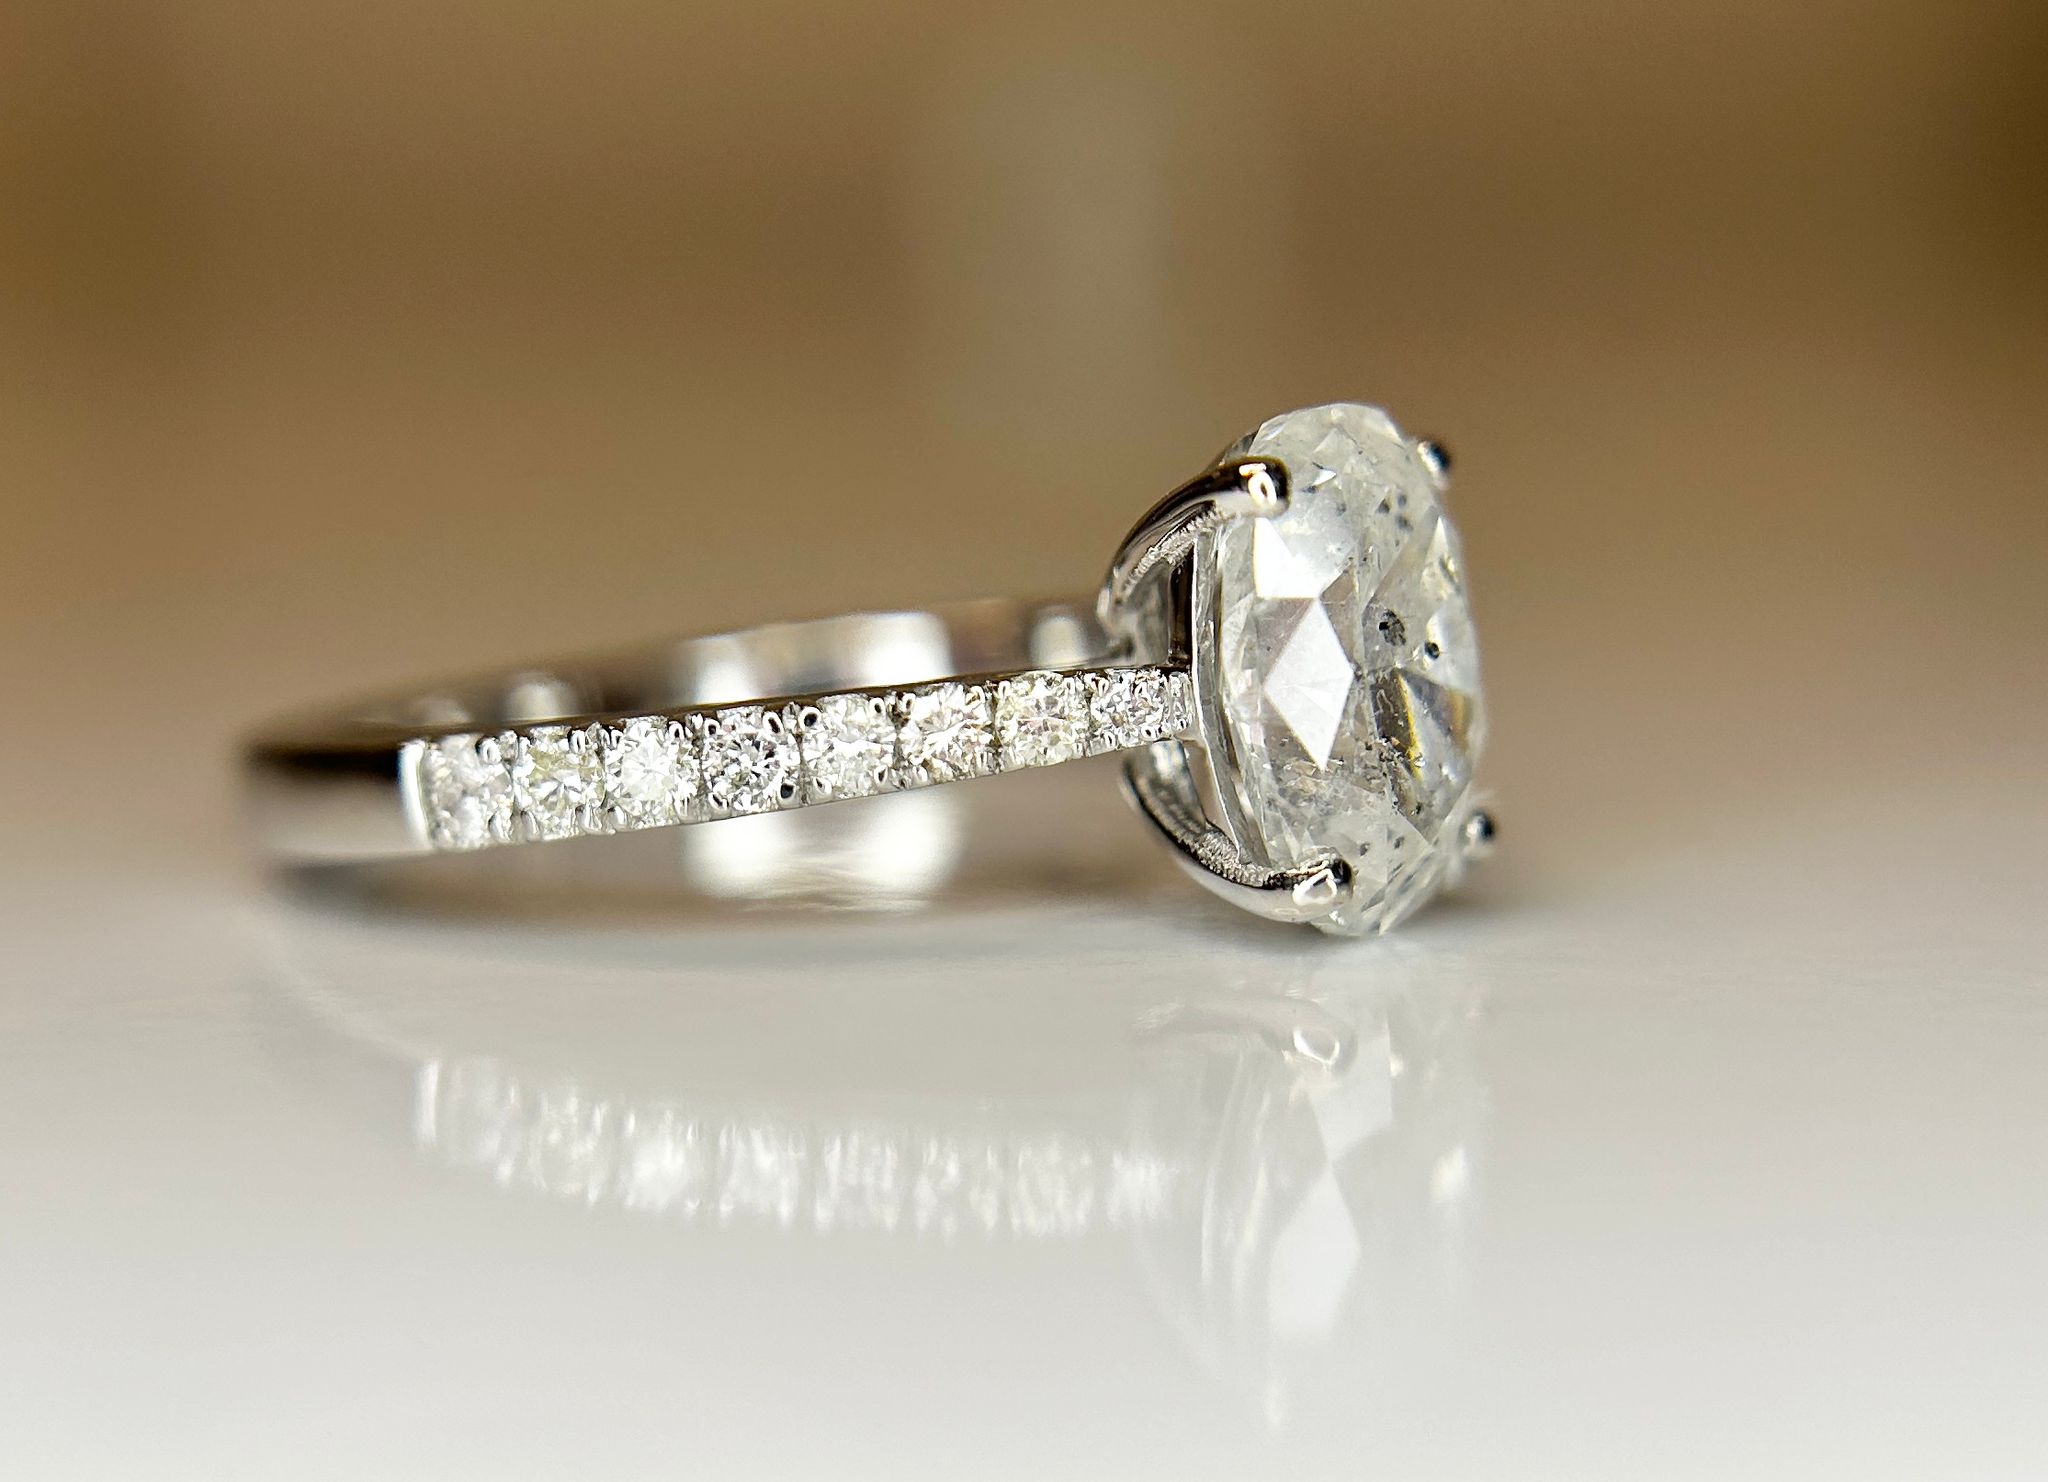 Beautiful Natural 1.69 CT Diamond Ring With 18k Gold - Image 3 of 8